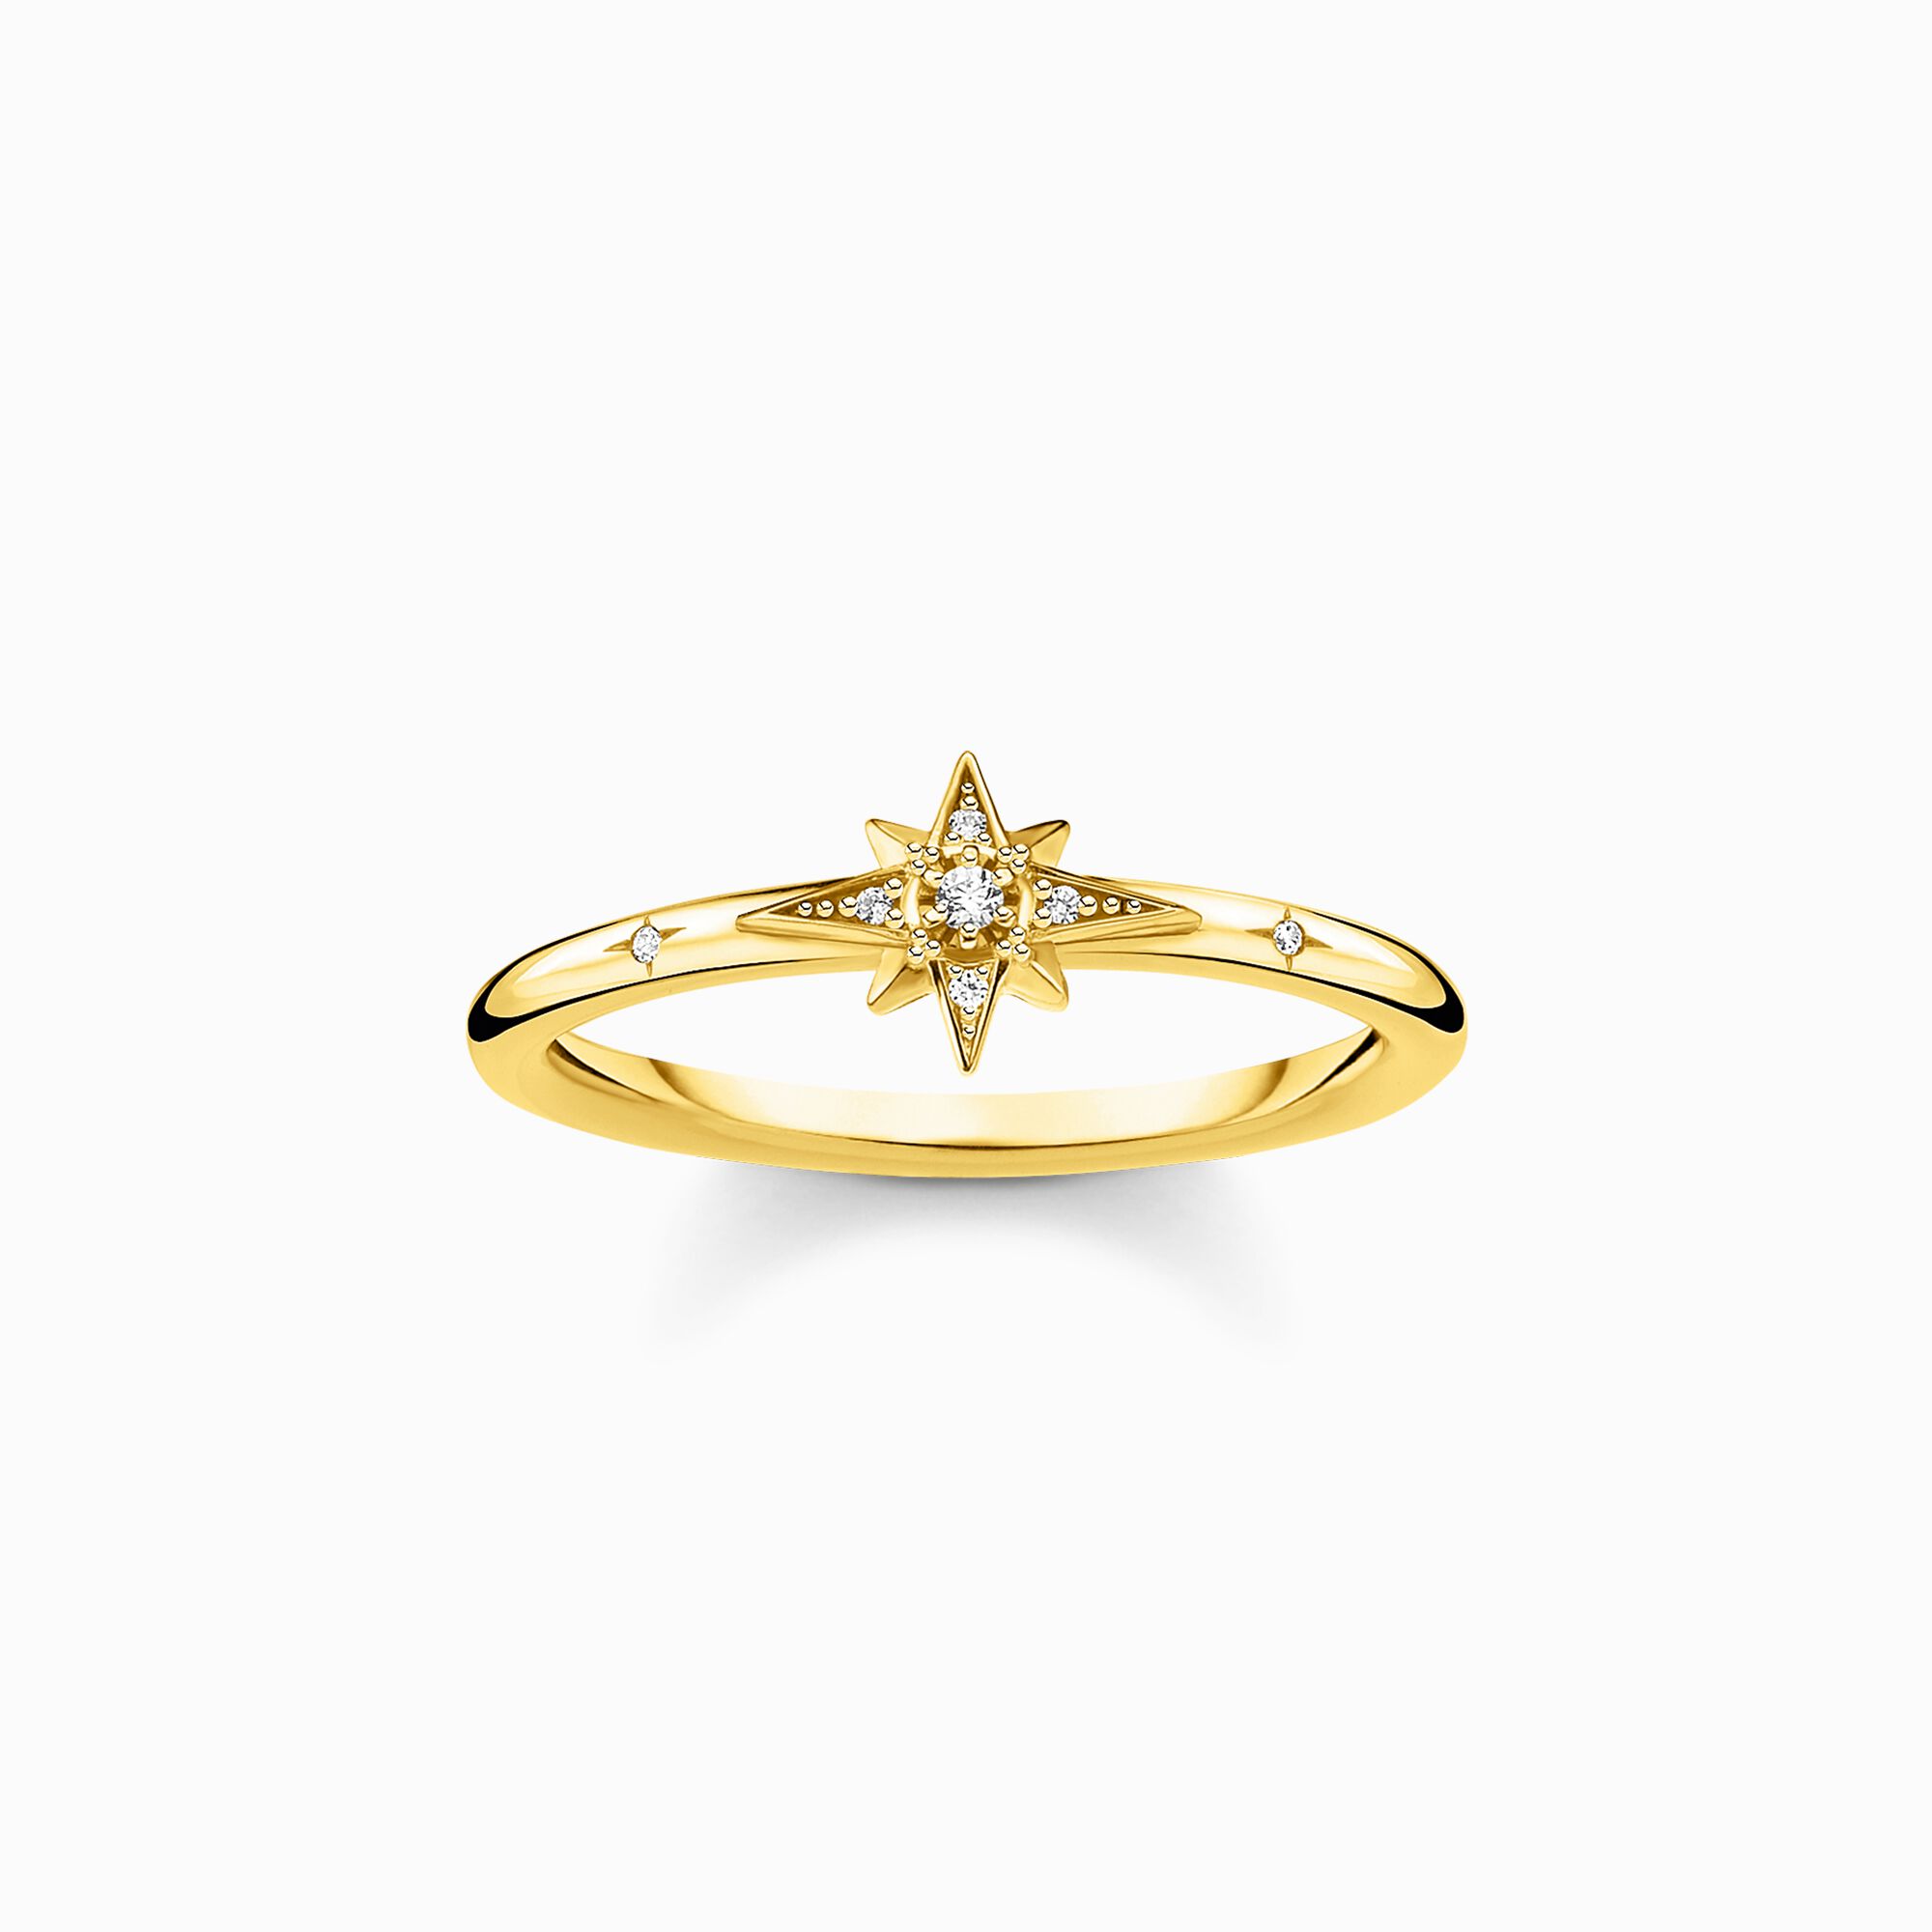 Ring star stones gold from the Charming Collection collection in the THOMAS SABO online store